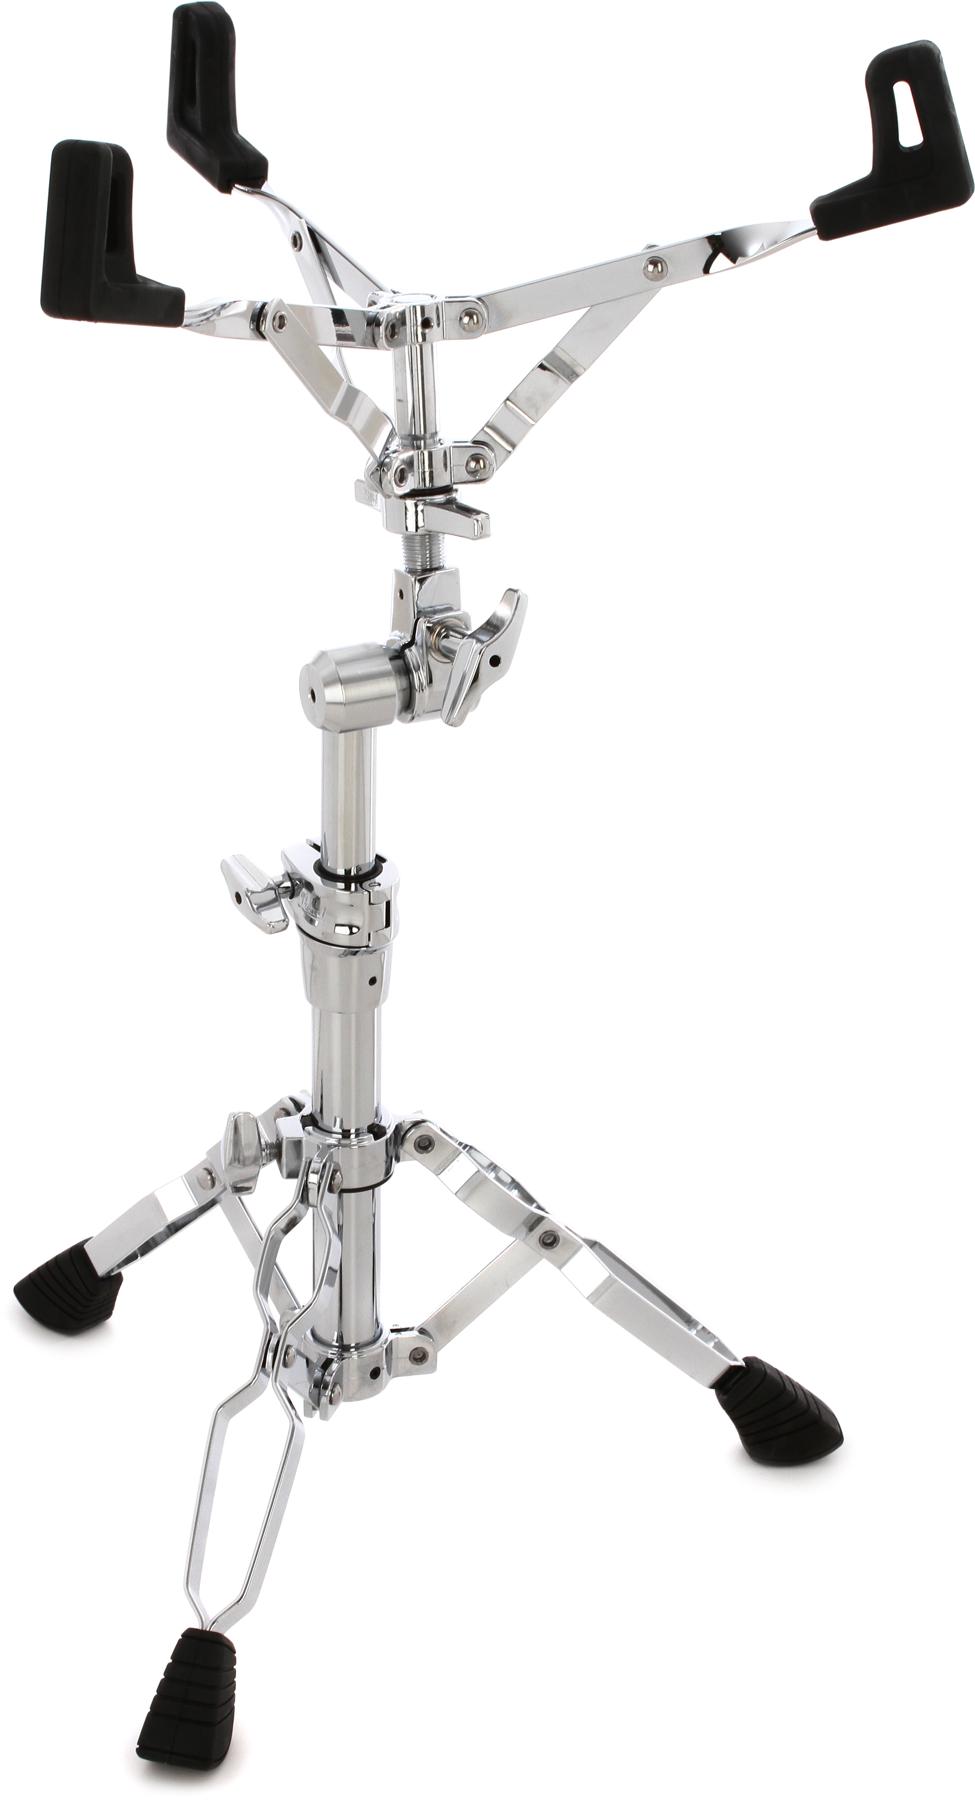 1. Pearl Snare Drum Stand (S930)